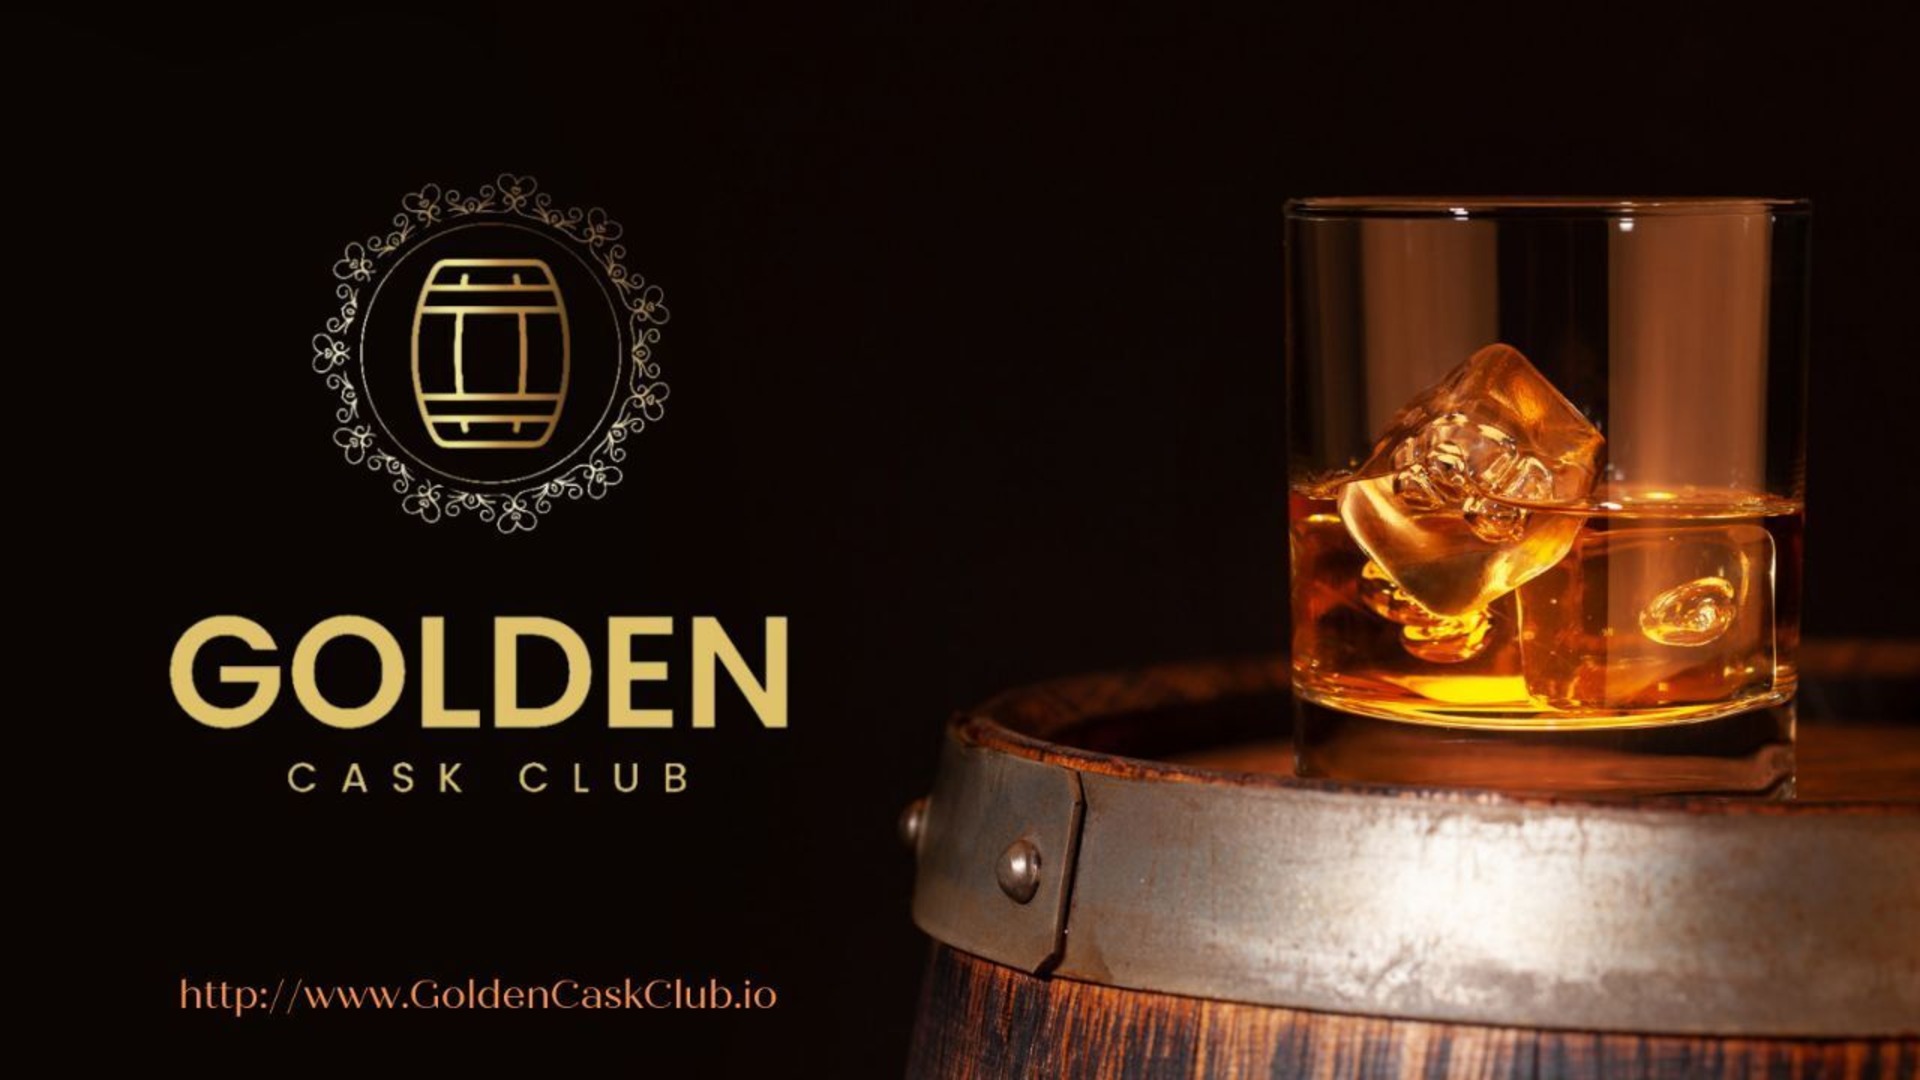 Top Shelf Investments: How Golden Cask Club is Drowning Out Arbitrum and Polkadot across Luxury Crypto Markets